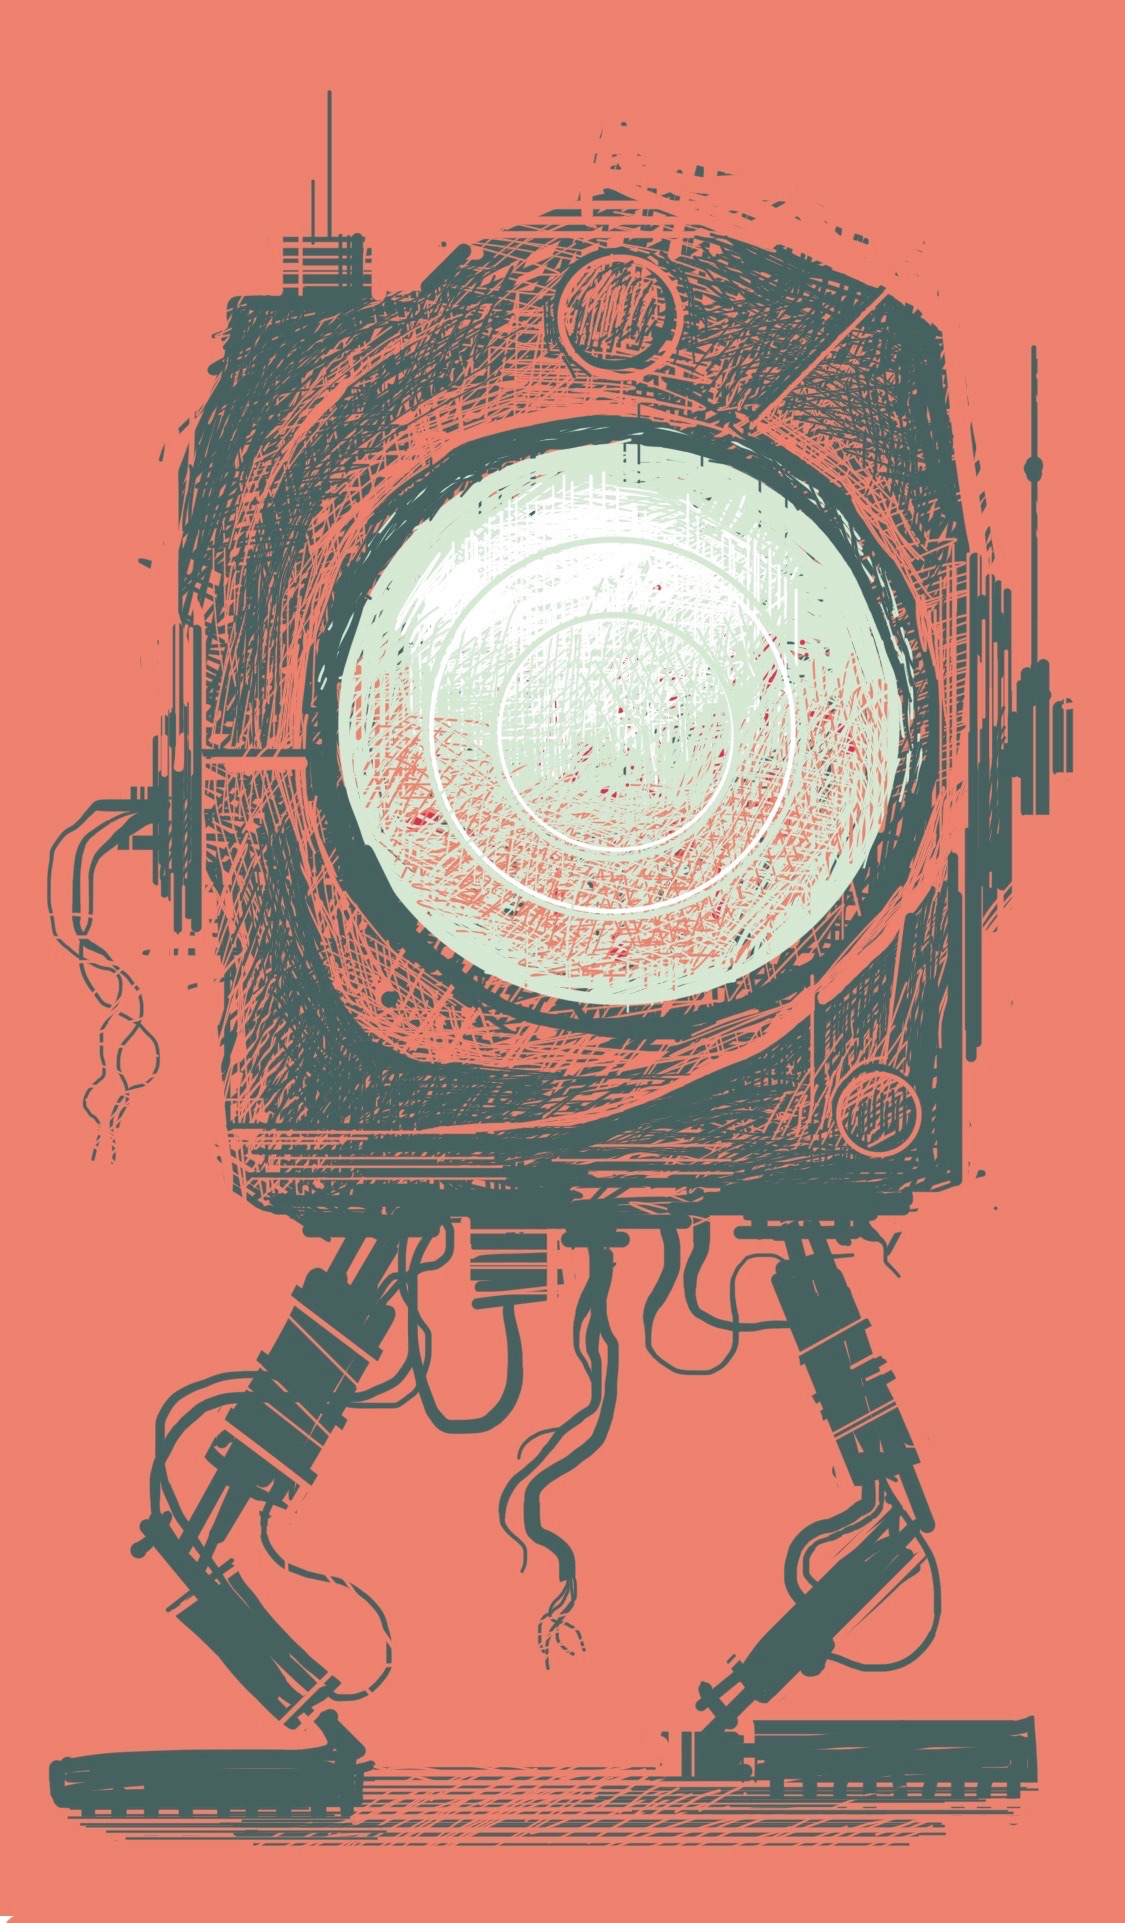 A small robot with a giant searchlight eye